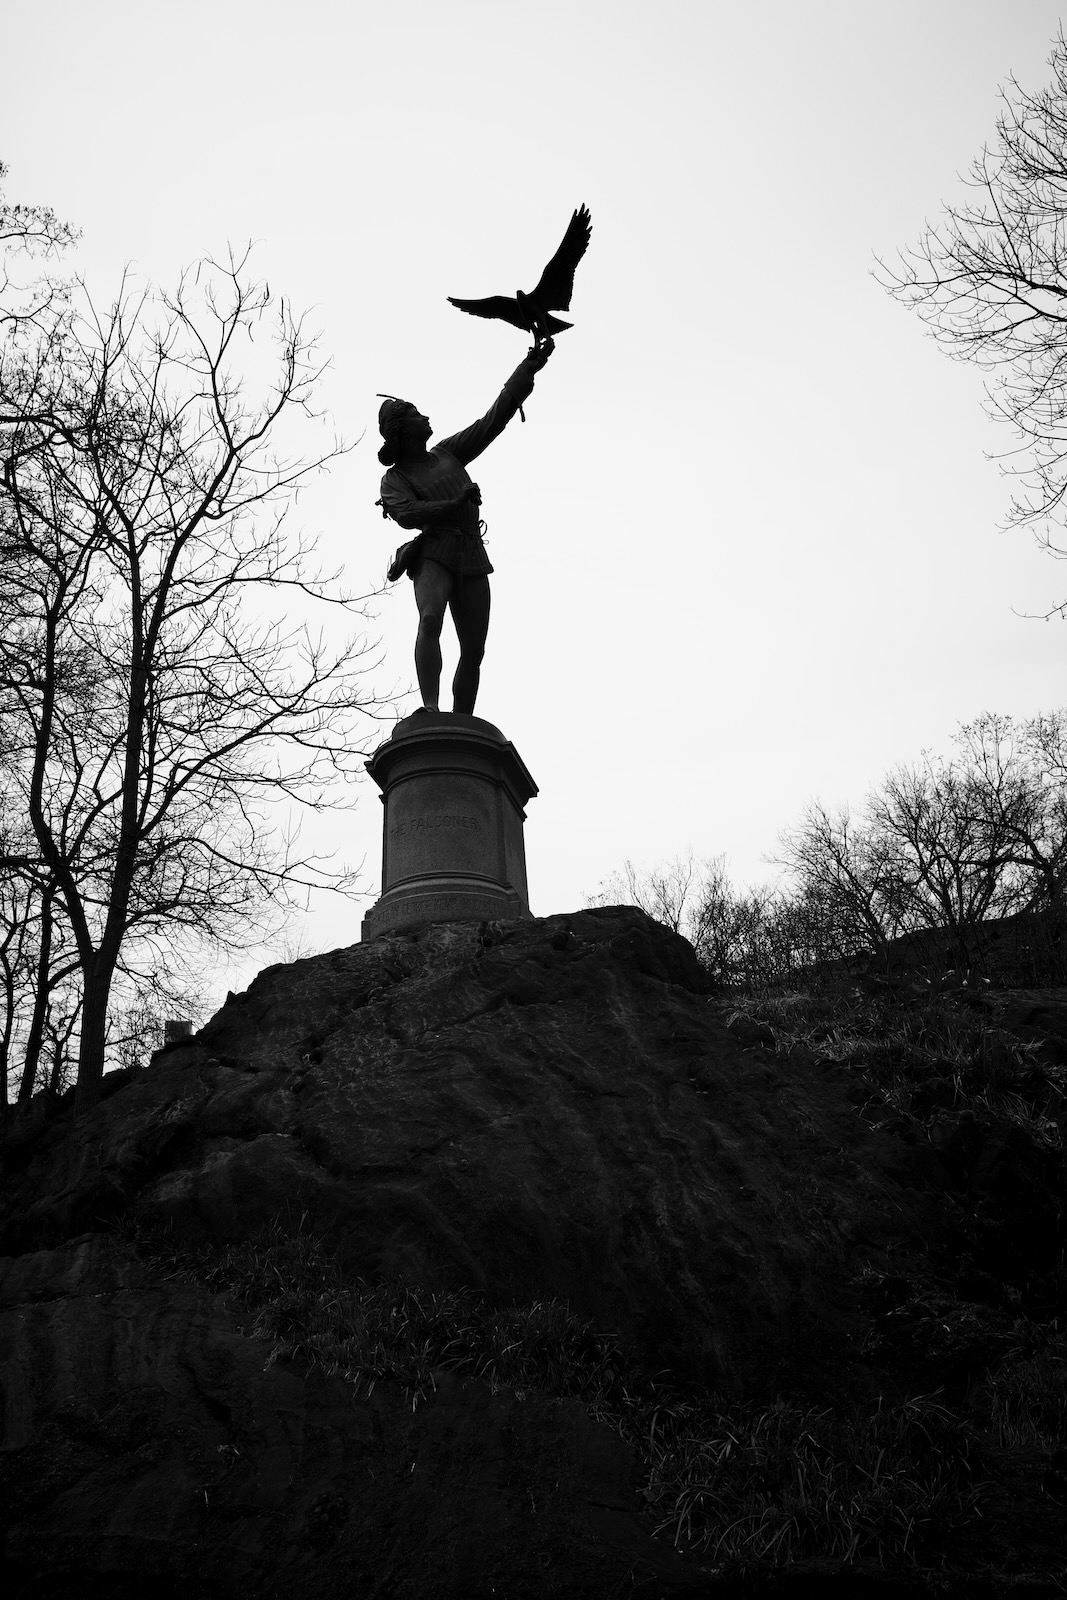 The Falconer sculpture in Central Park, silhouetted by the sun. The sculpture features a man extending his arm as a falcon alights on it.”